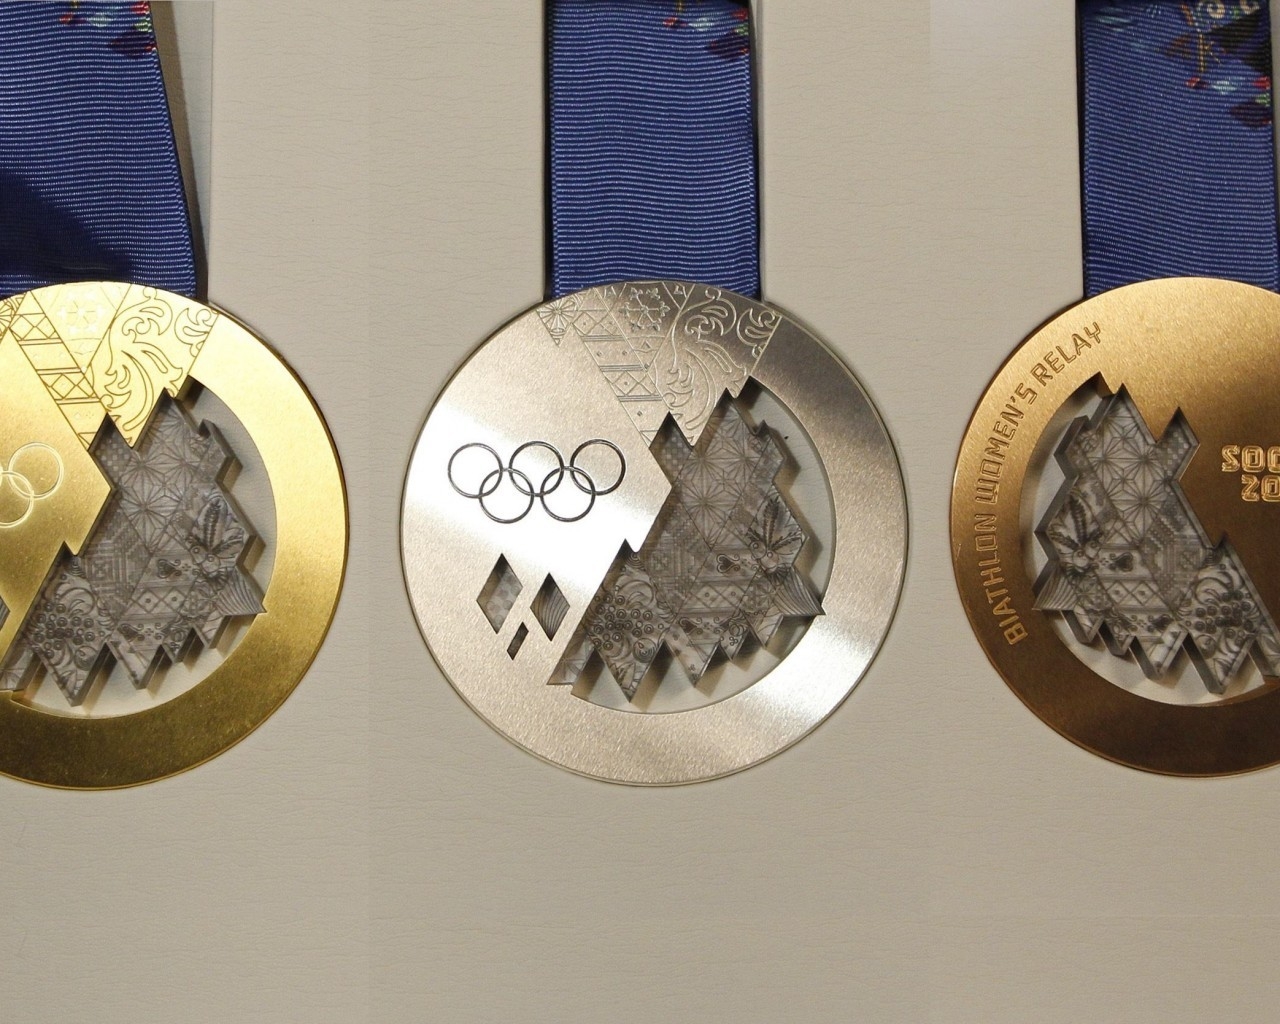 Sochi 2014 Medals for 1280 x 1024 resolution